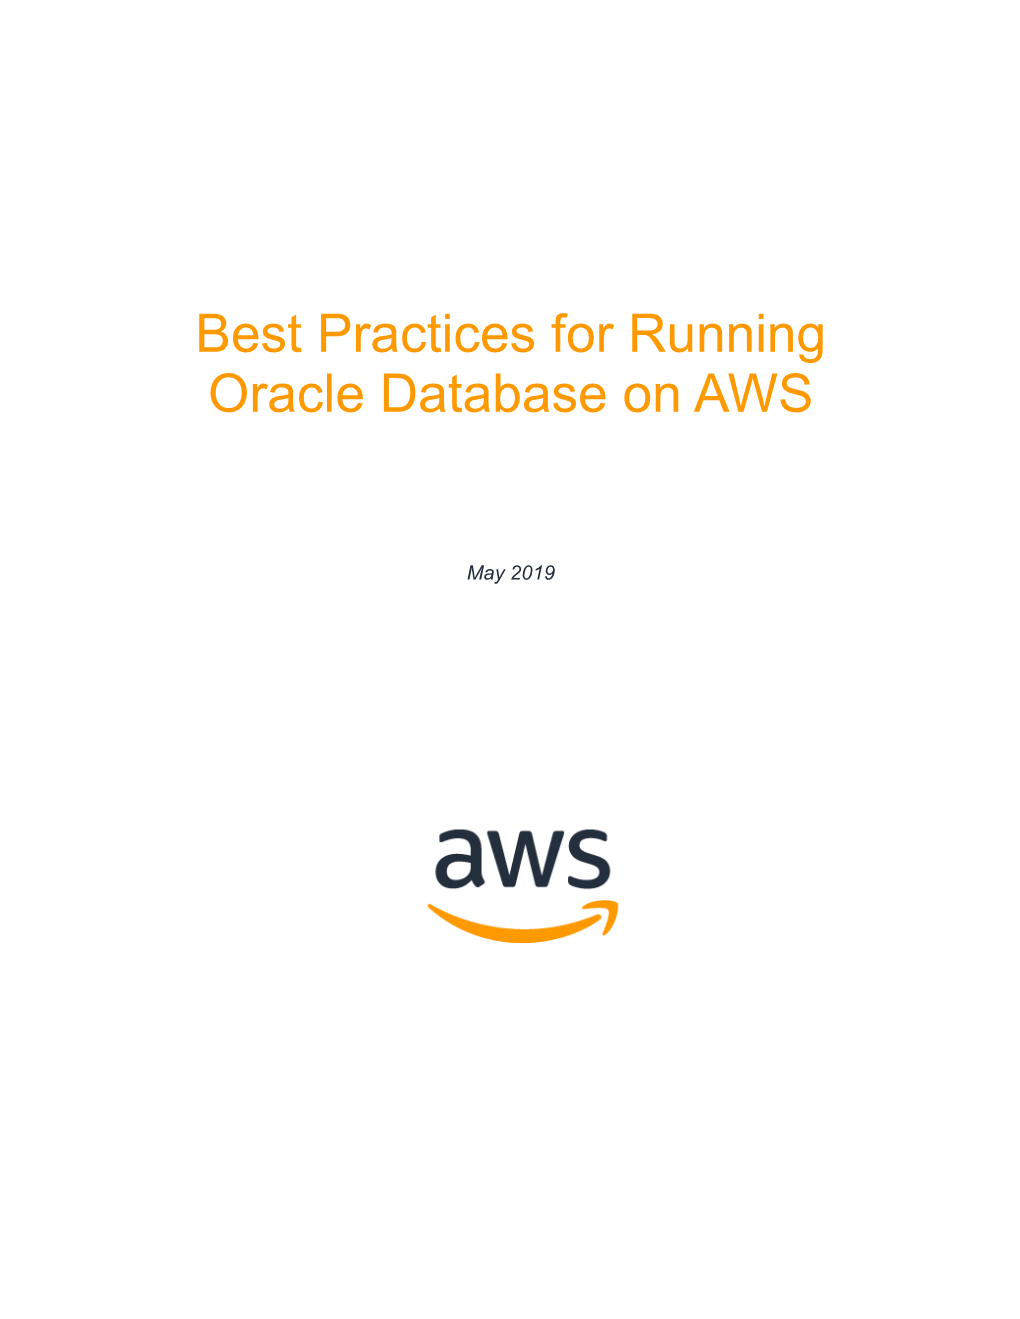 Best Practices for Running Oracle Database on AWS